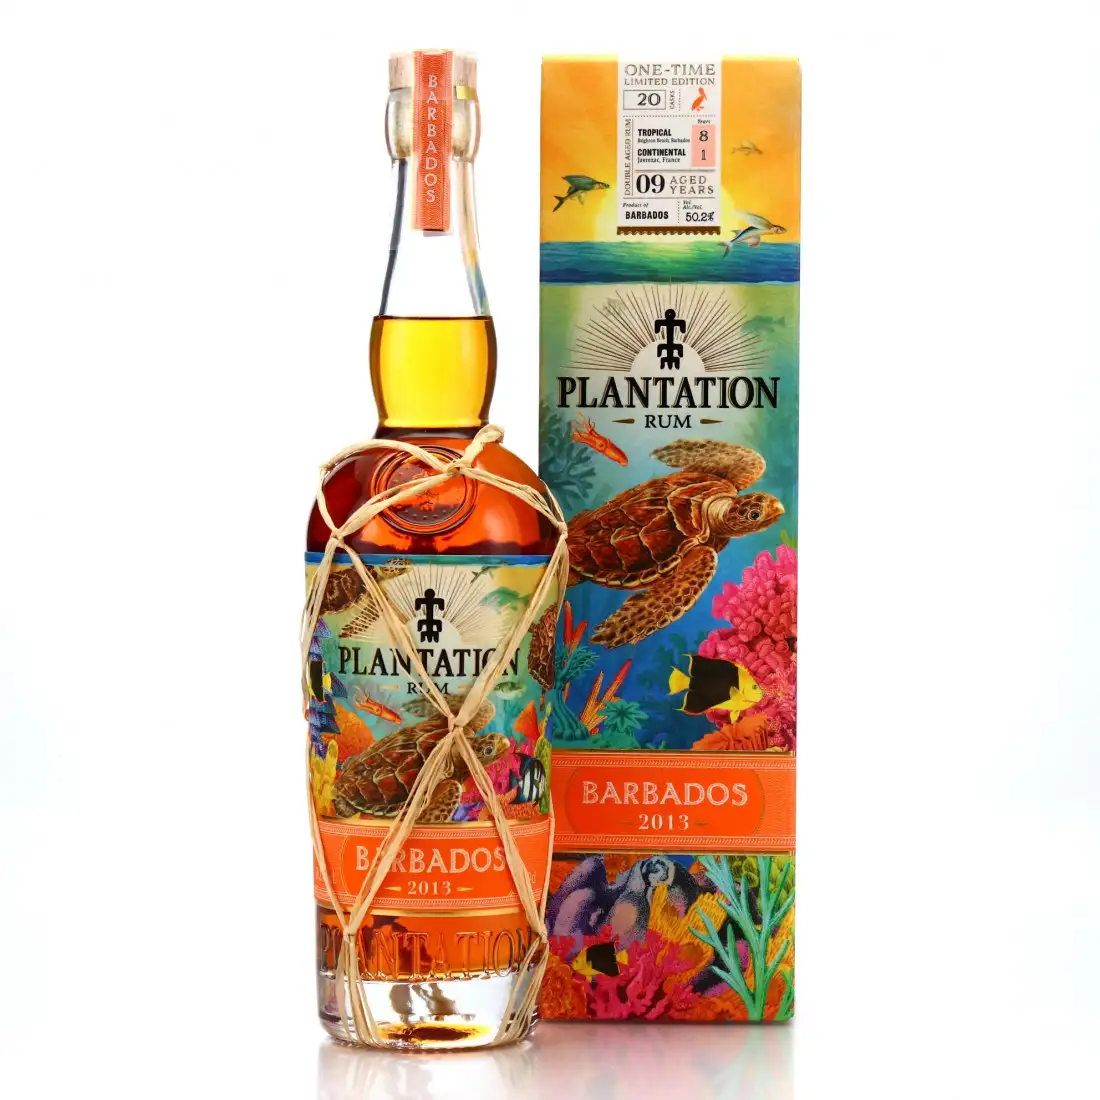 Image of the front of the bottle of the rum Plantation Barbados One-Time Limited 20